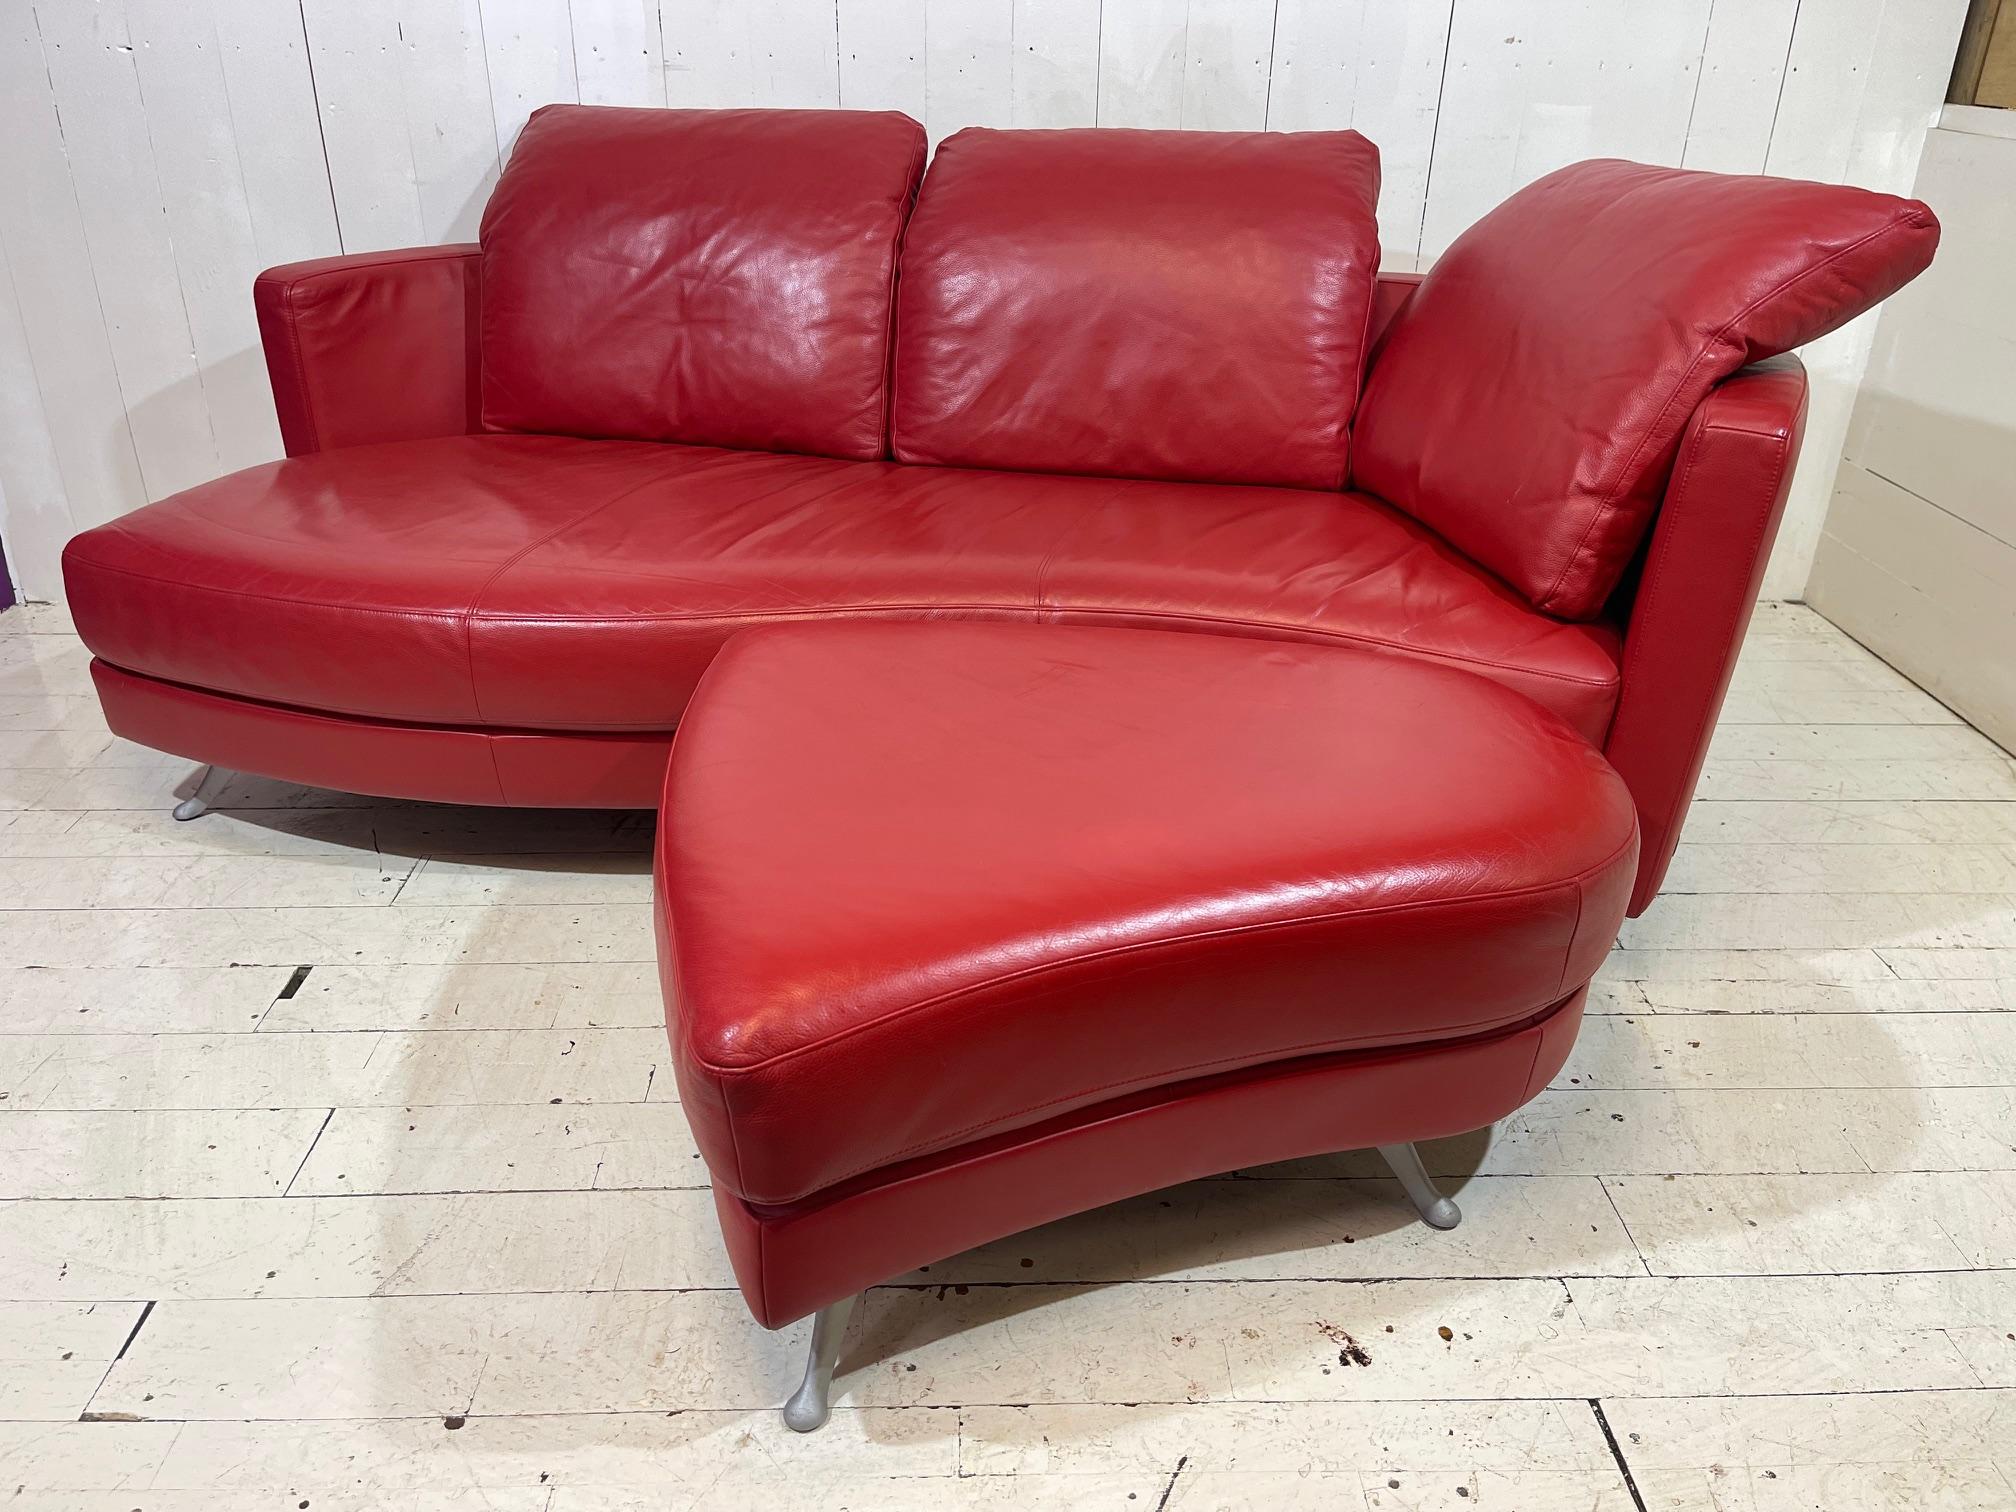 Contemporary Limited Edition Red Leather Sofa and Footstool Set by Rolf Benz In Good Condition For Sale In Tarleton, GB